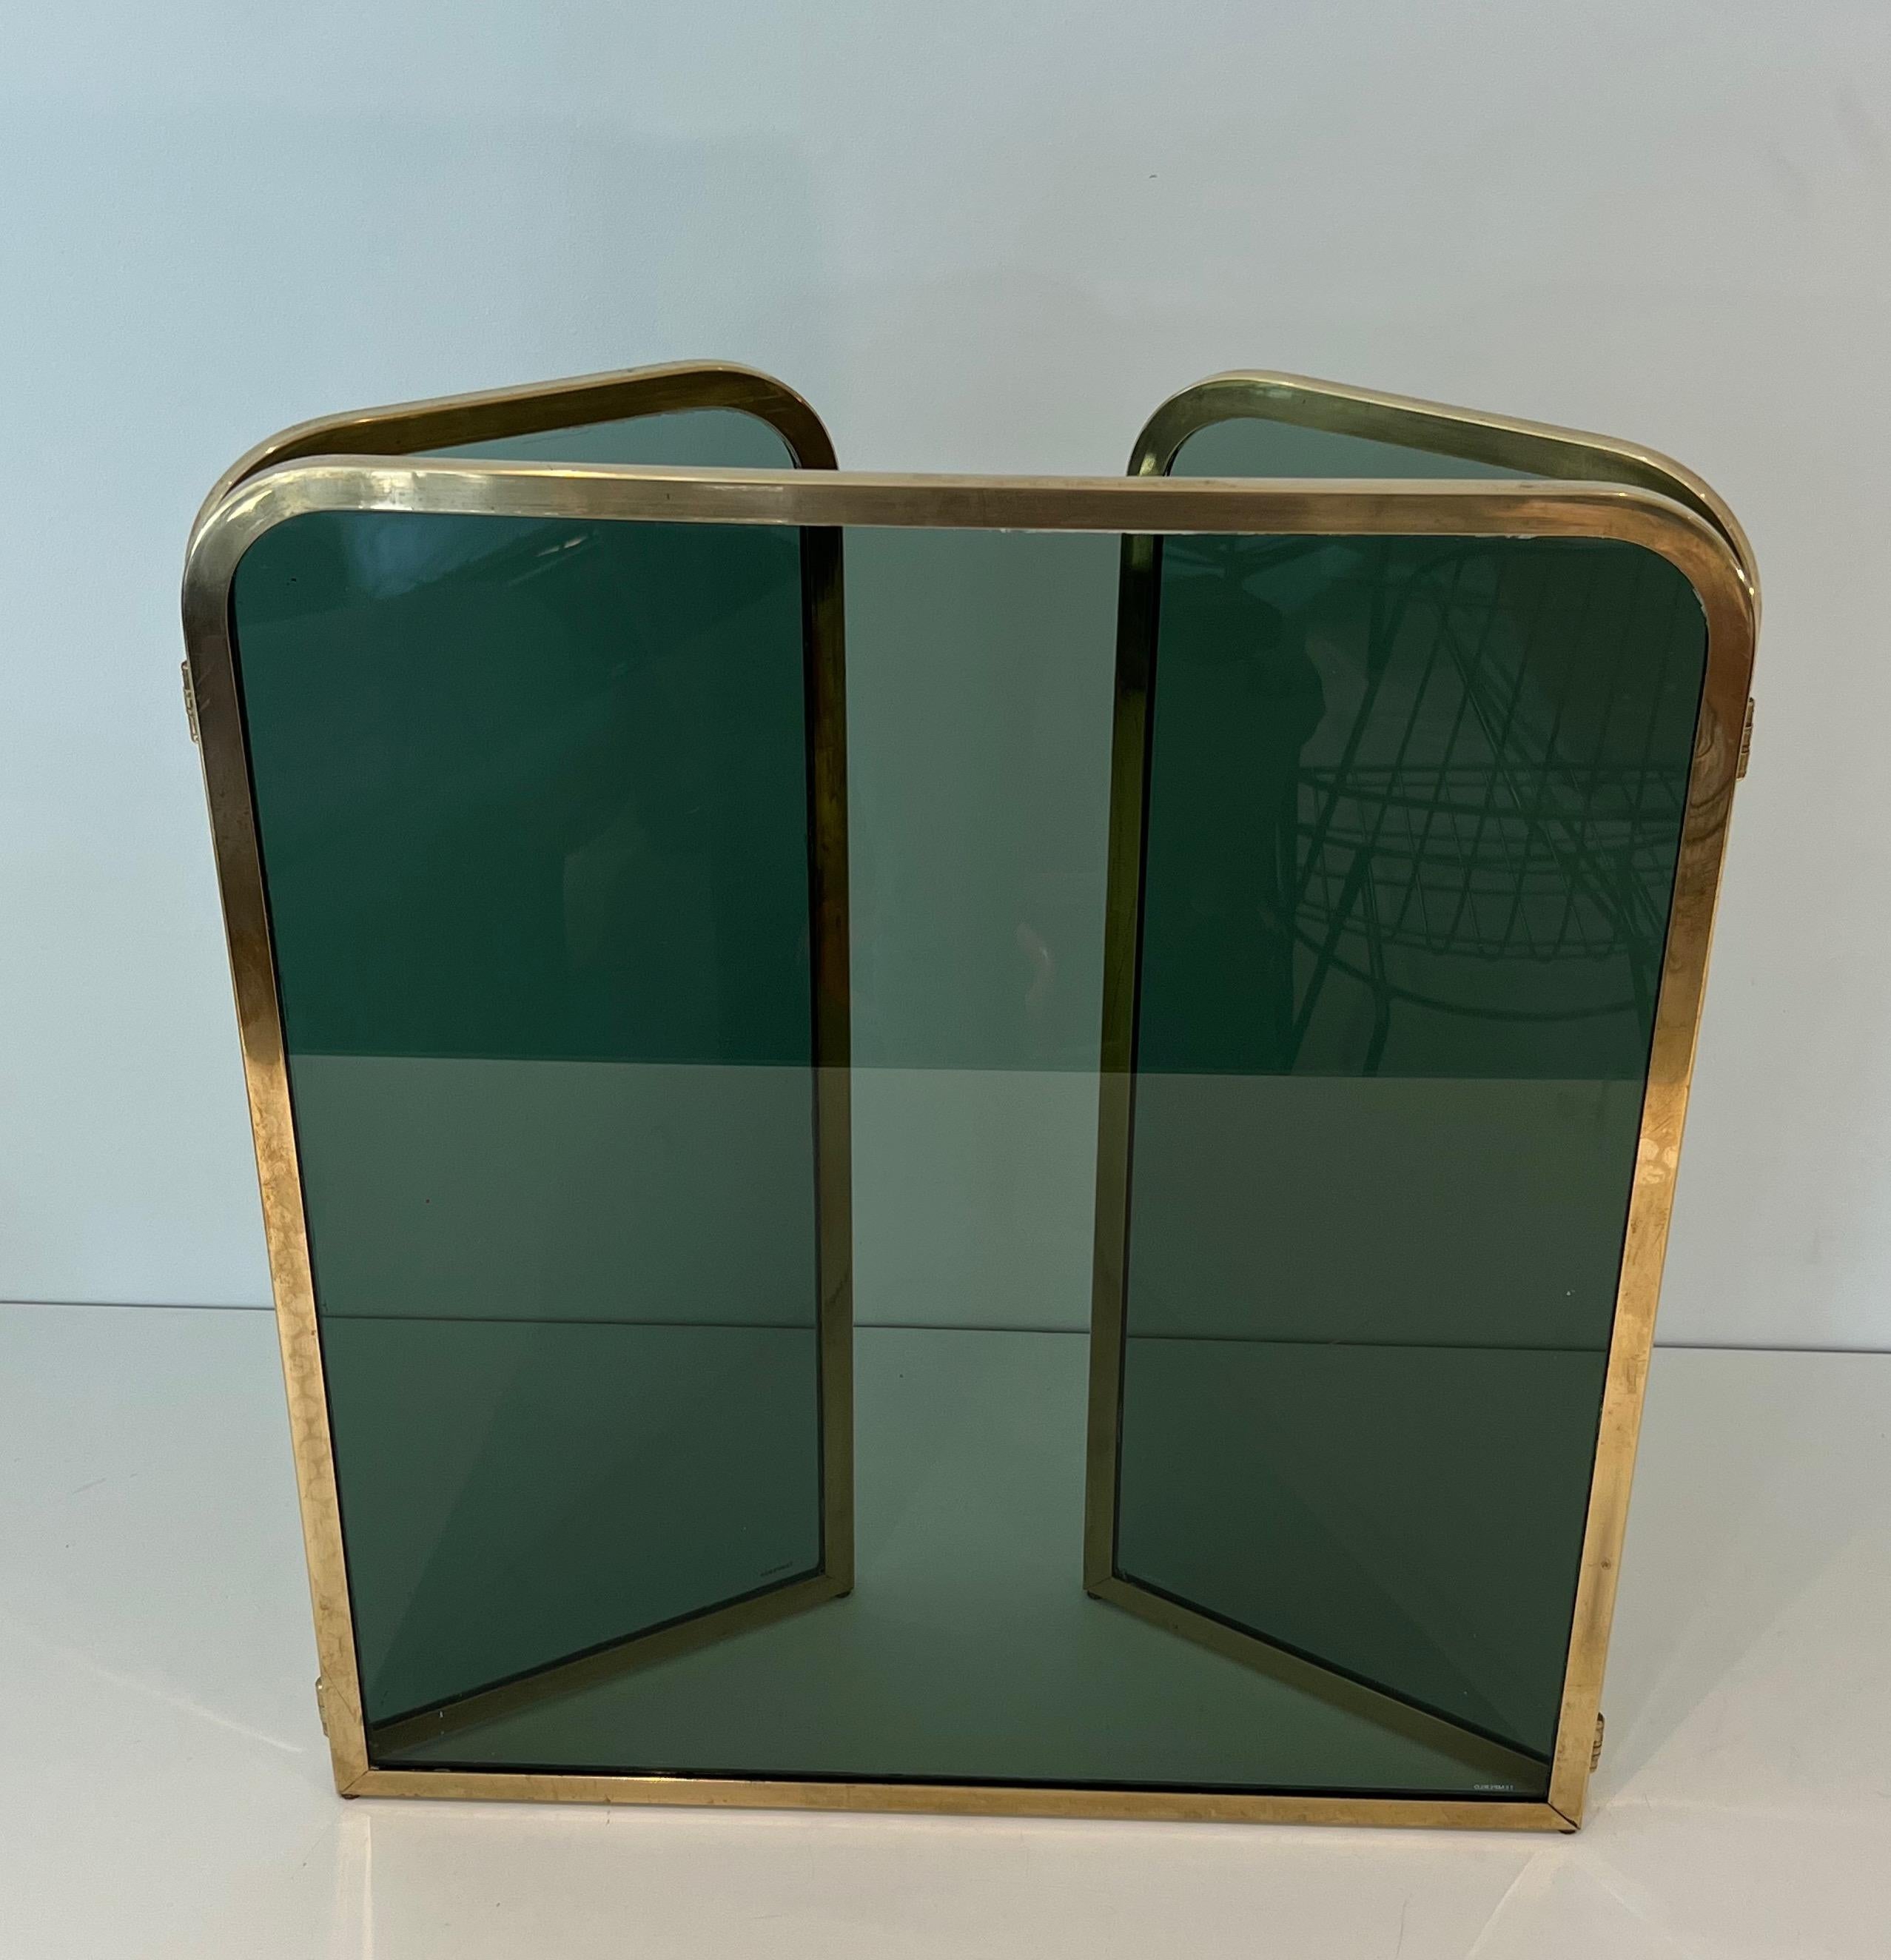 Late 20th Century Fireplace Screen Made of 3 Greenish Glass Panels Surrounded by a Brass Frame For Sale